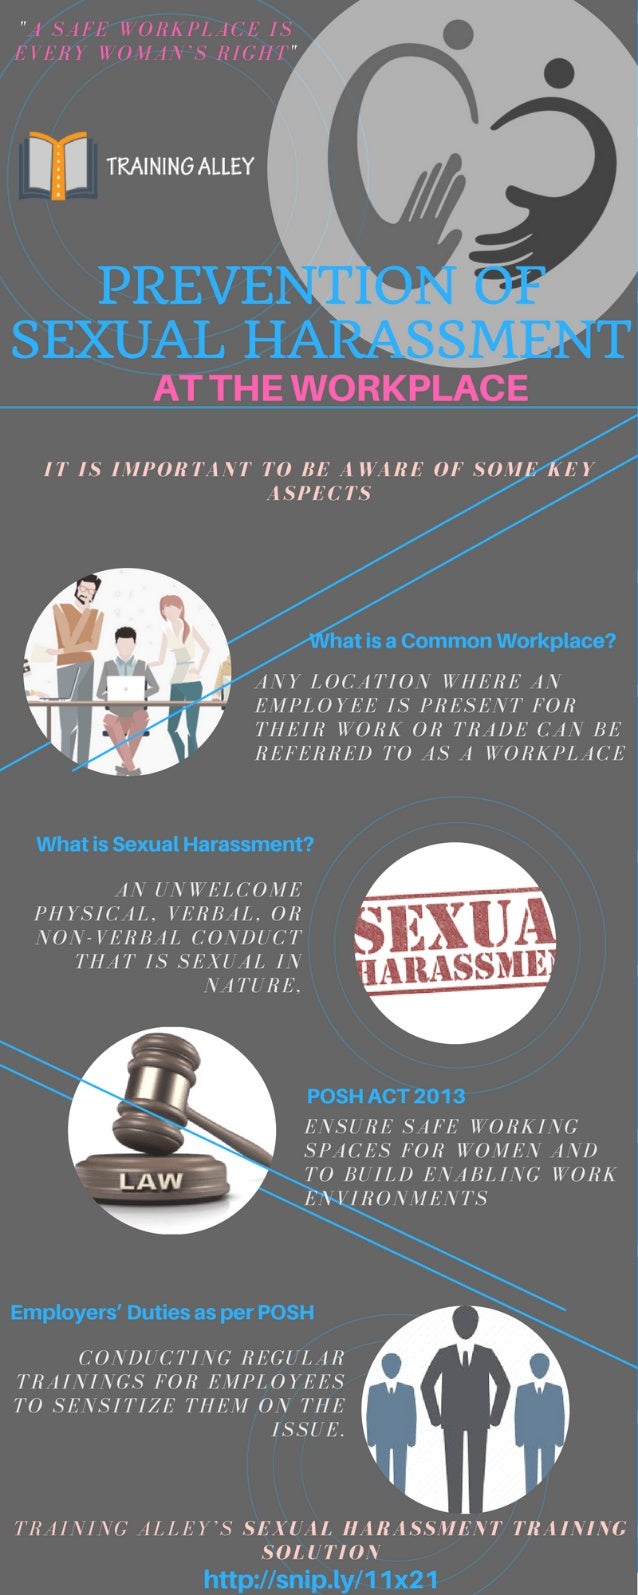 Prevention Of Sexual Harassment Posh At The Workplace 